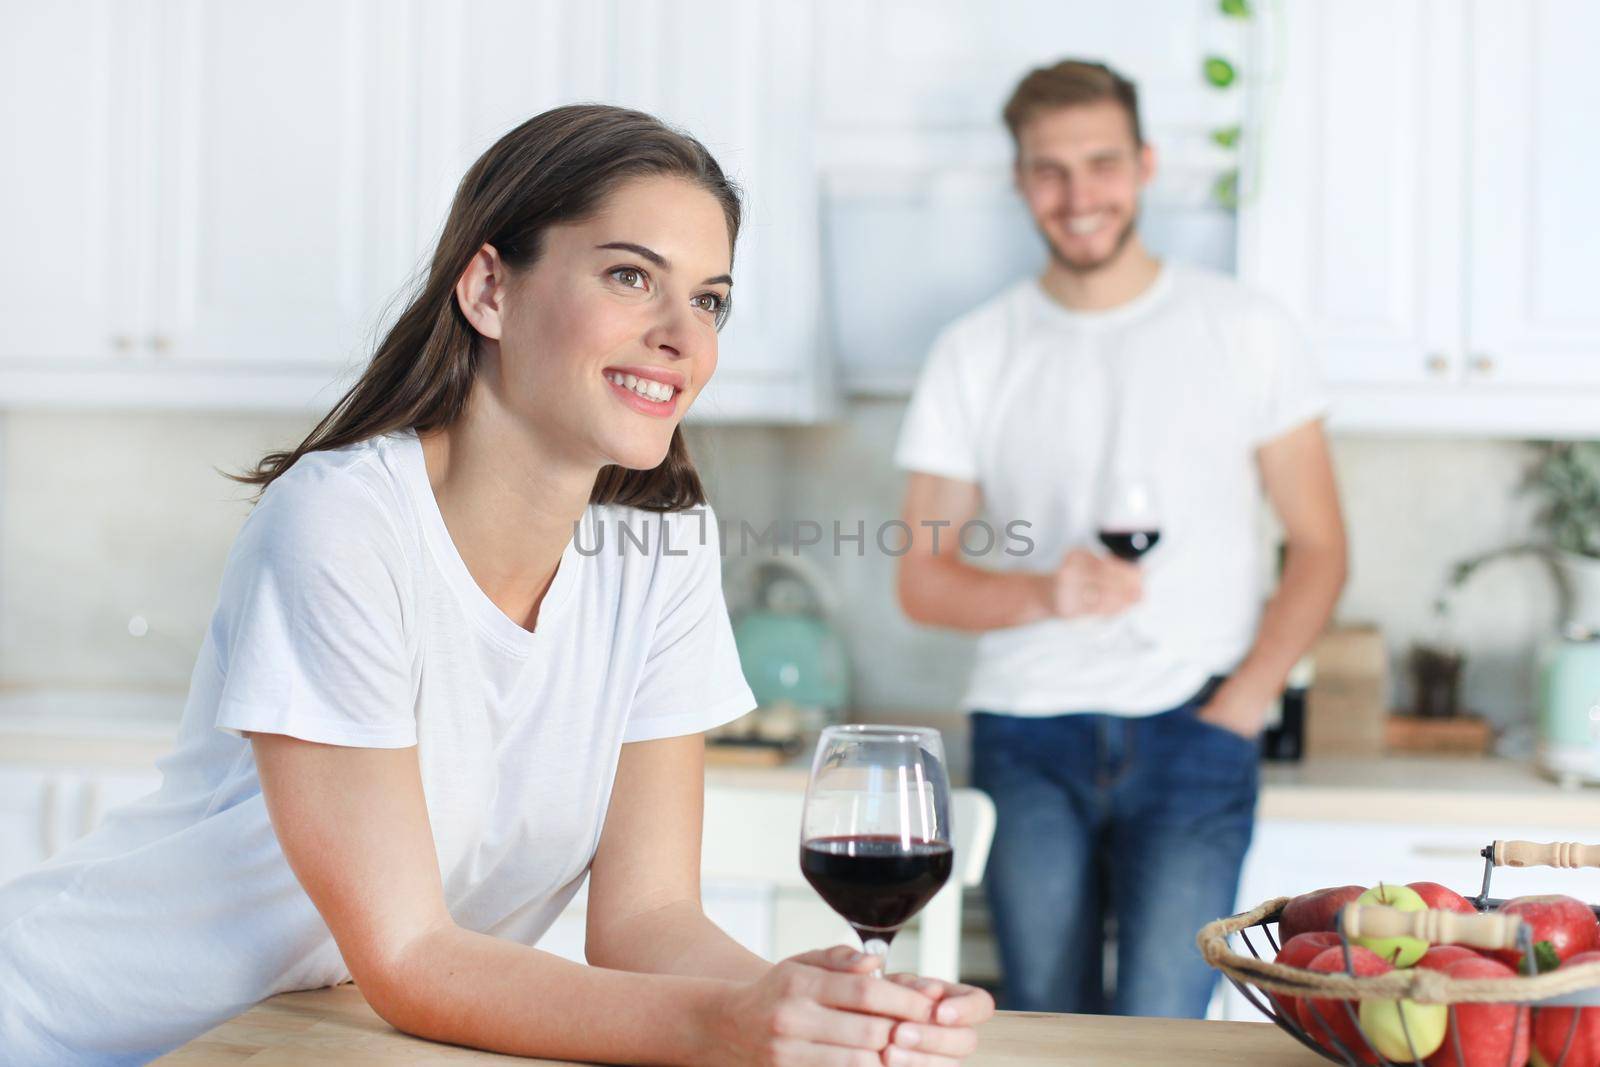 Pretty young woman drinking some wine at home in kitchen.